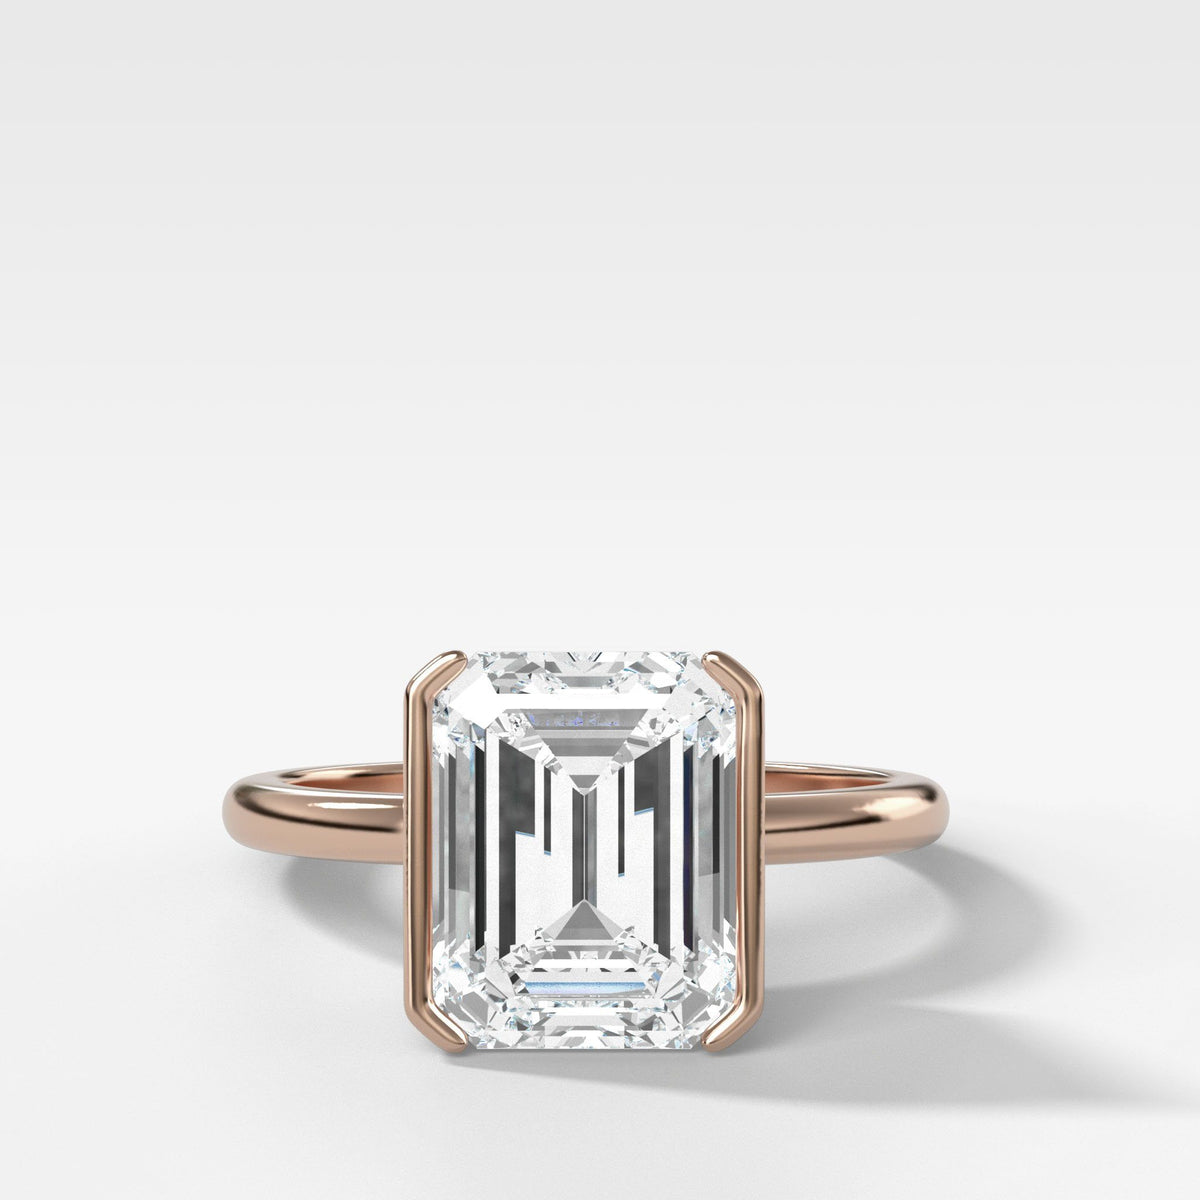 North South Half Bezel Solitaire Engagement Ring With Emerald Cut by Good Stone in Rose Gold